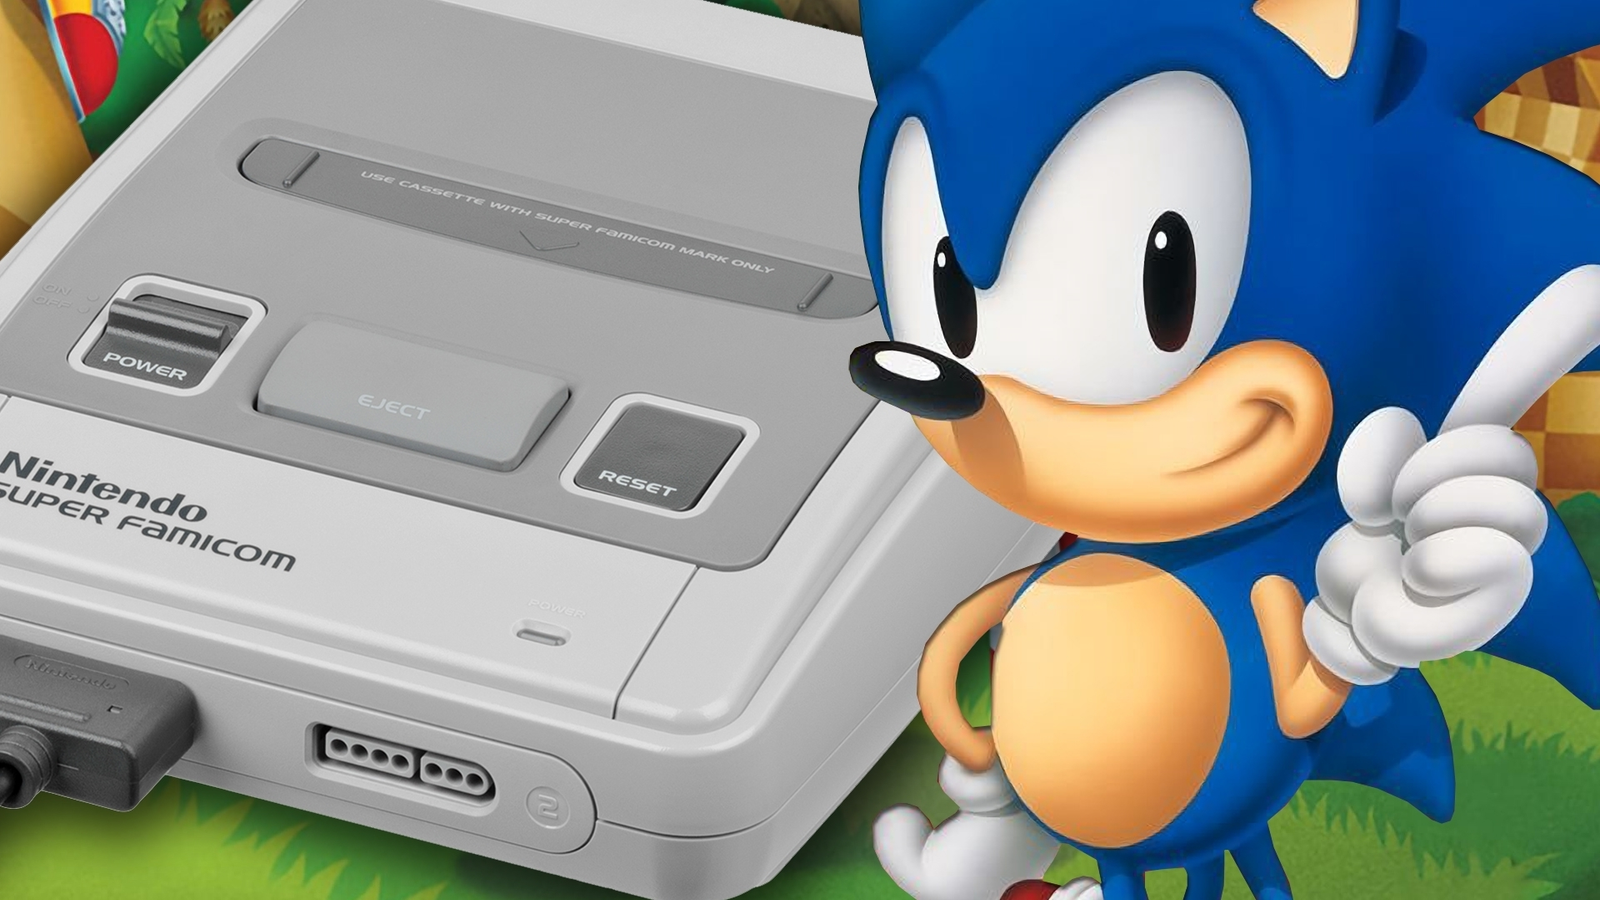 Sonic the Hedgehog running on Super NES - see the tech demo in